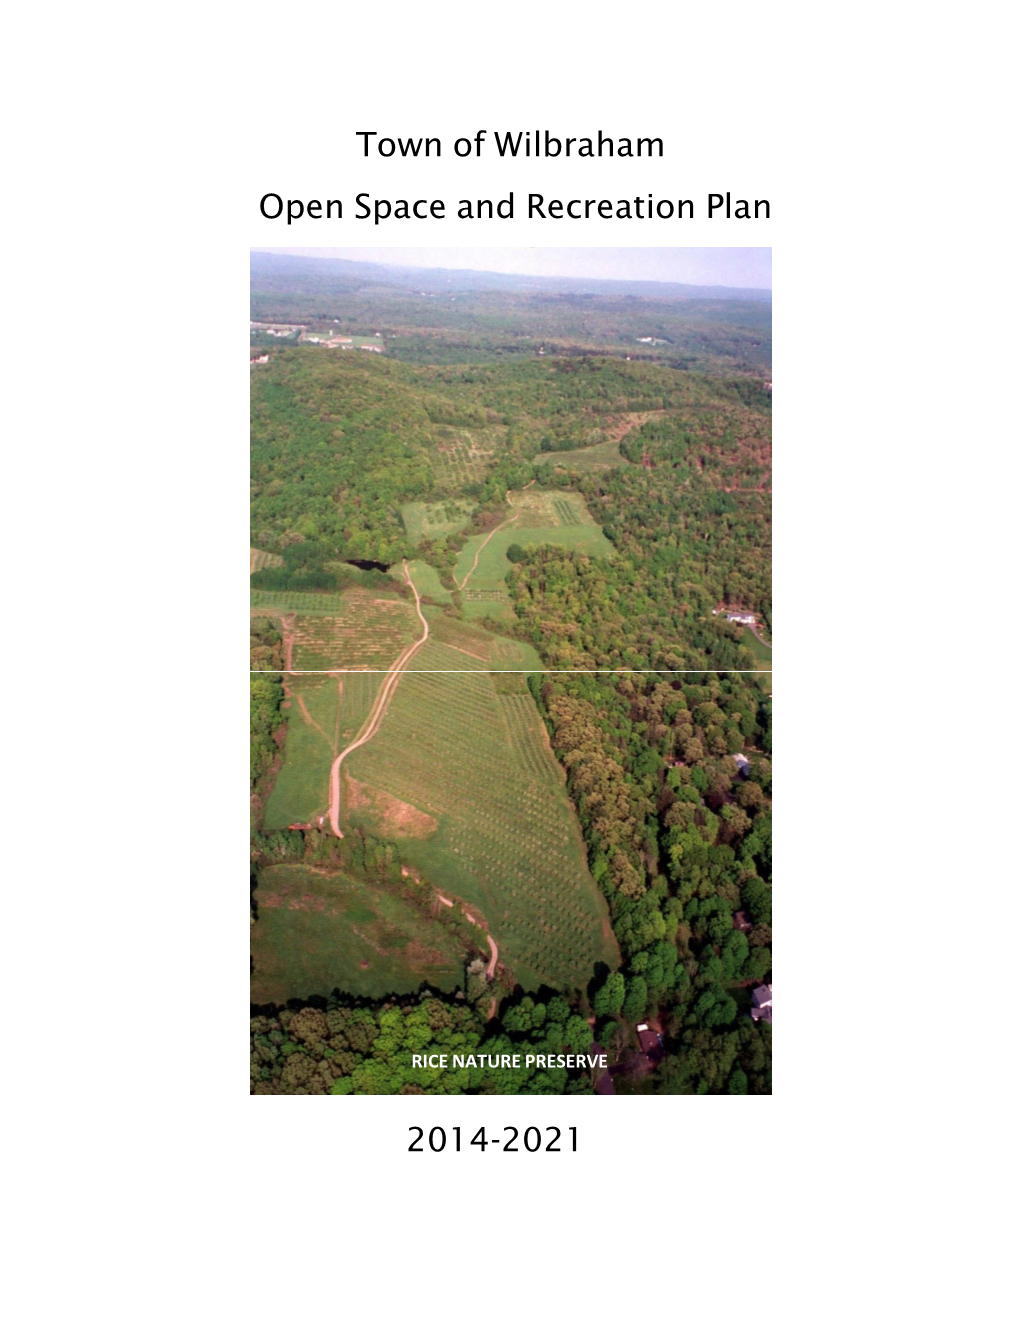 Town of Wilbraham Open Space and Recreation Plan 2014-2021